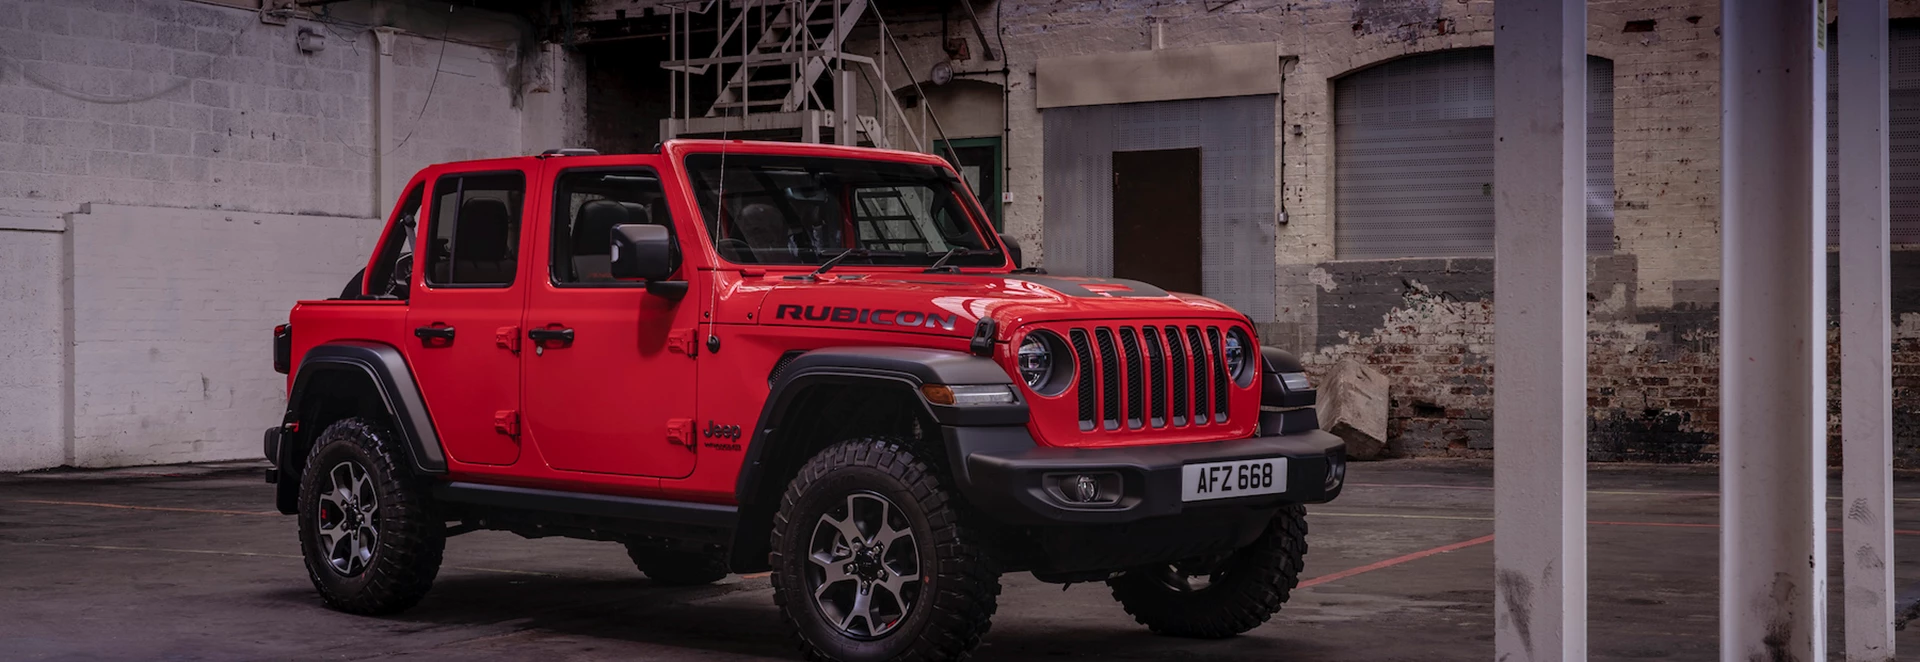 Jeep introduces new Wrangler 1941 special edition to mark 80th birthday 